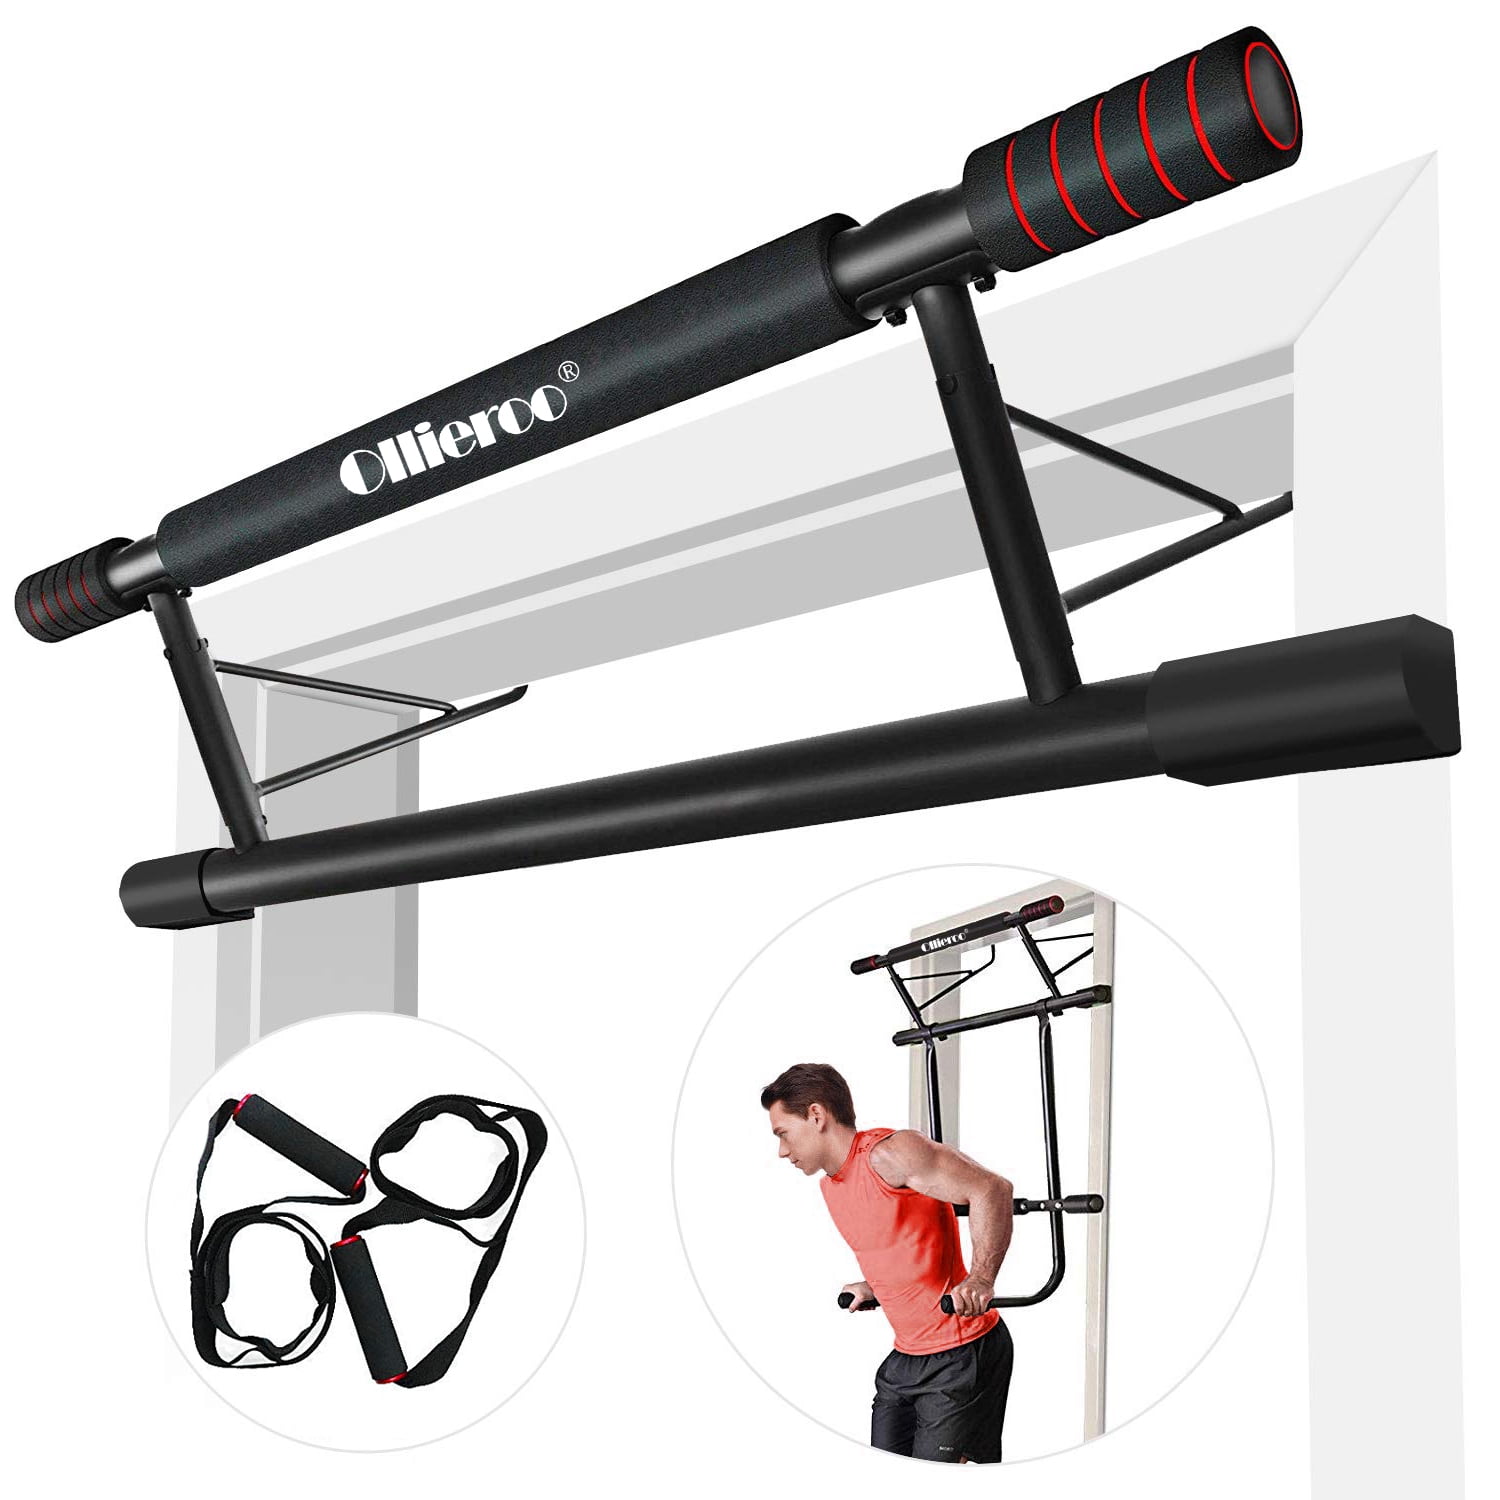 Black Pull Up Bar Doorway Fitness Chin Up Strength Training Bars with Dip Bar & Power Ropes Foldable Door Bar Ergonomic Grip Trainer Workout for Home Gym Exercise 